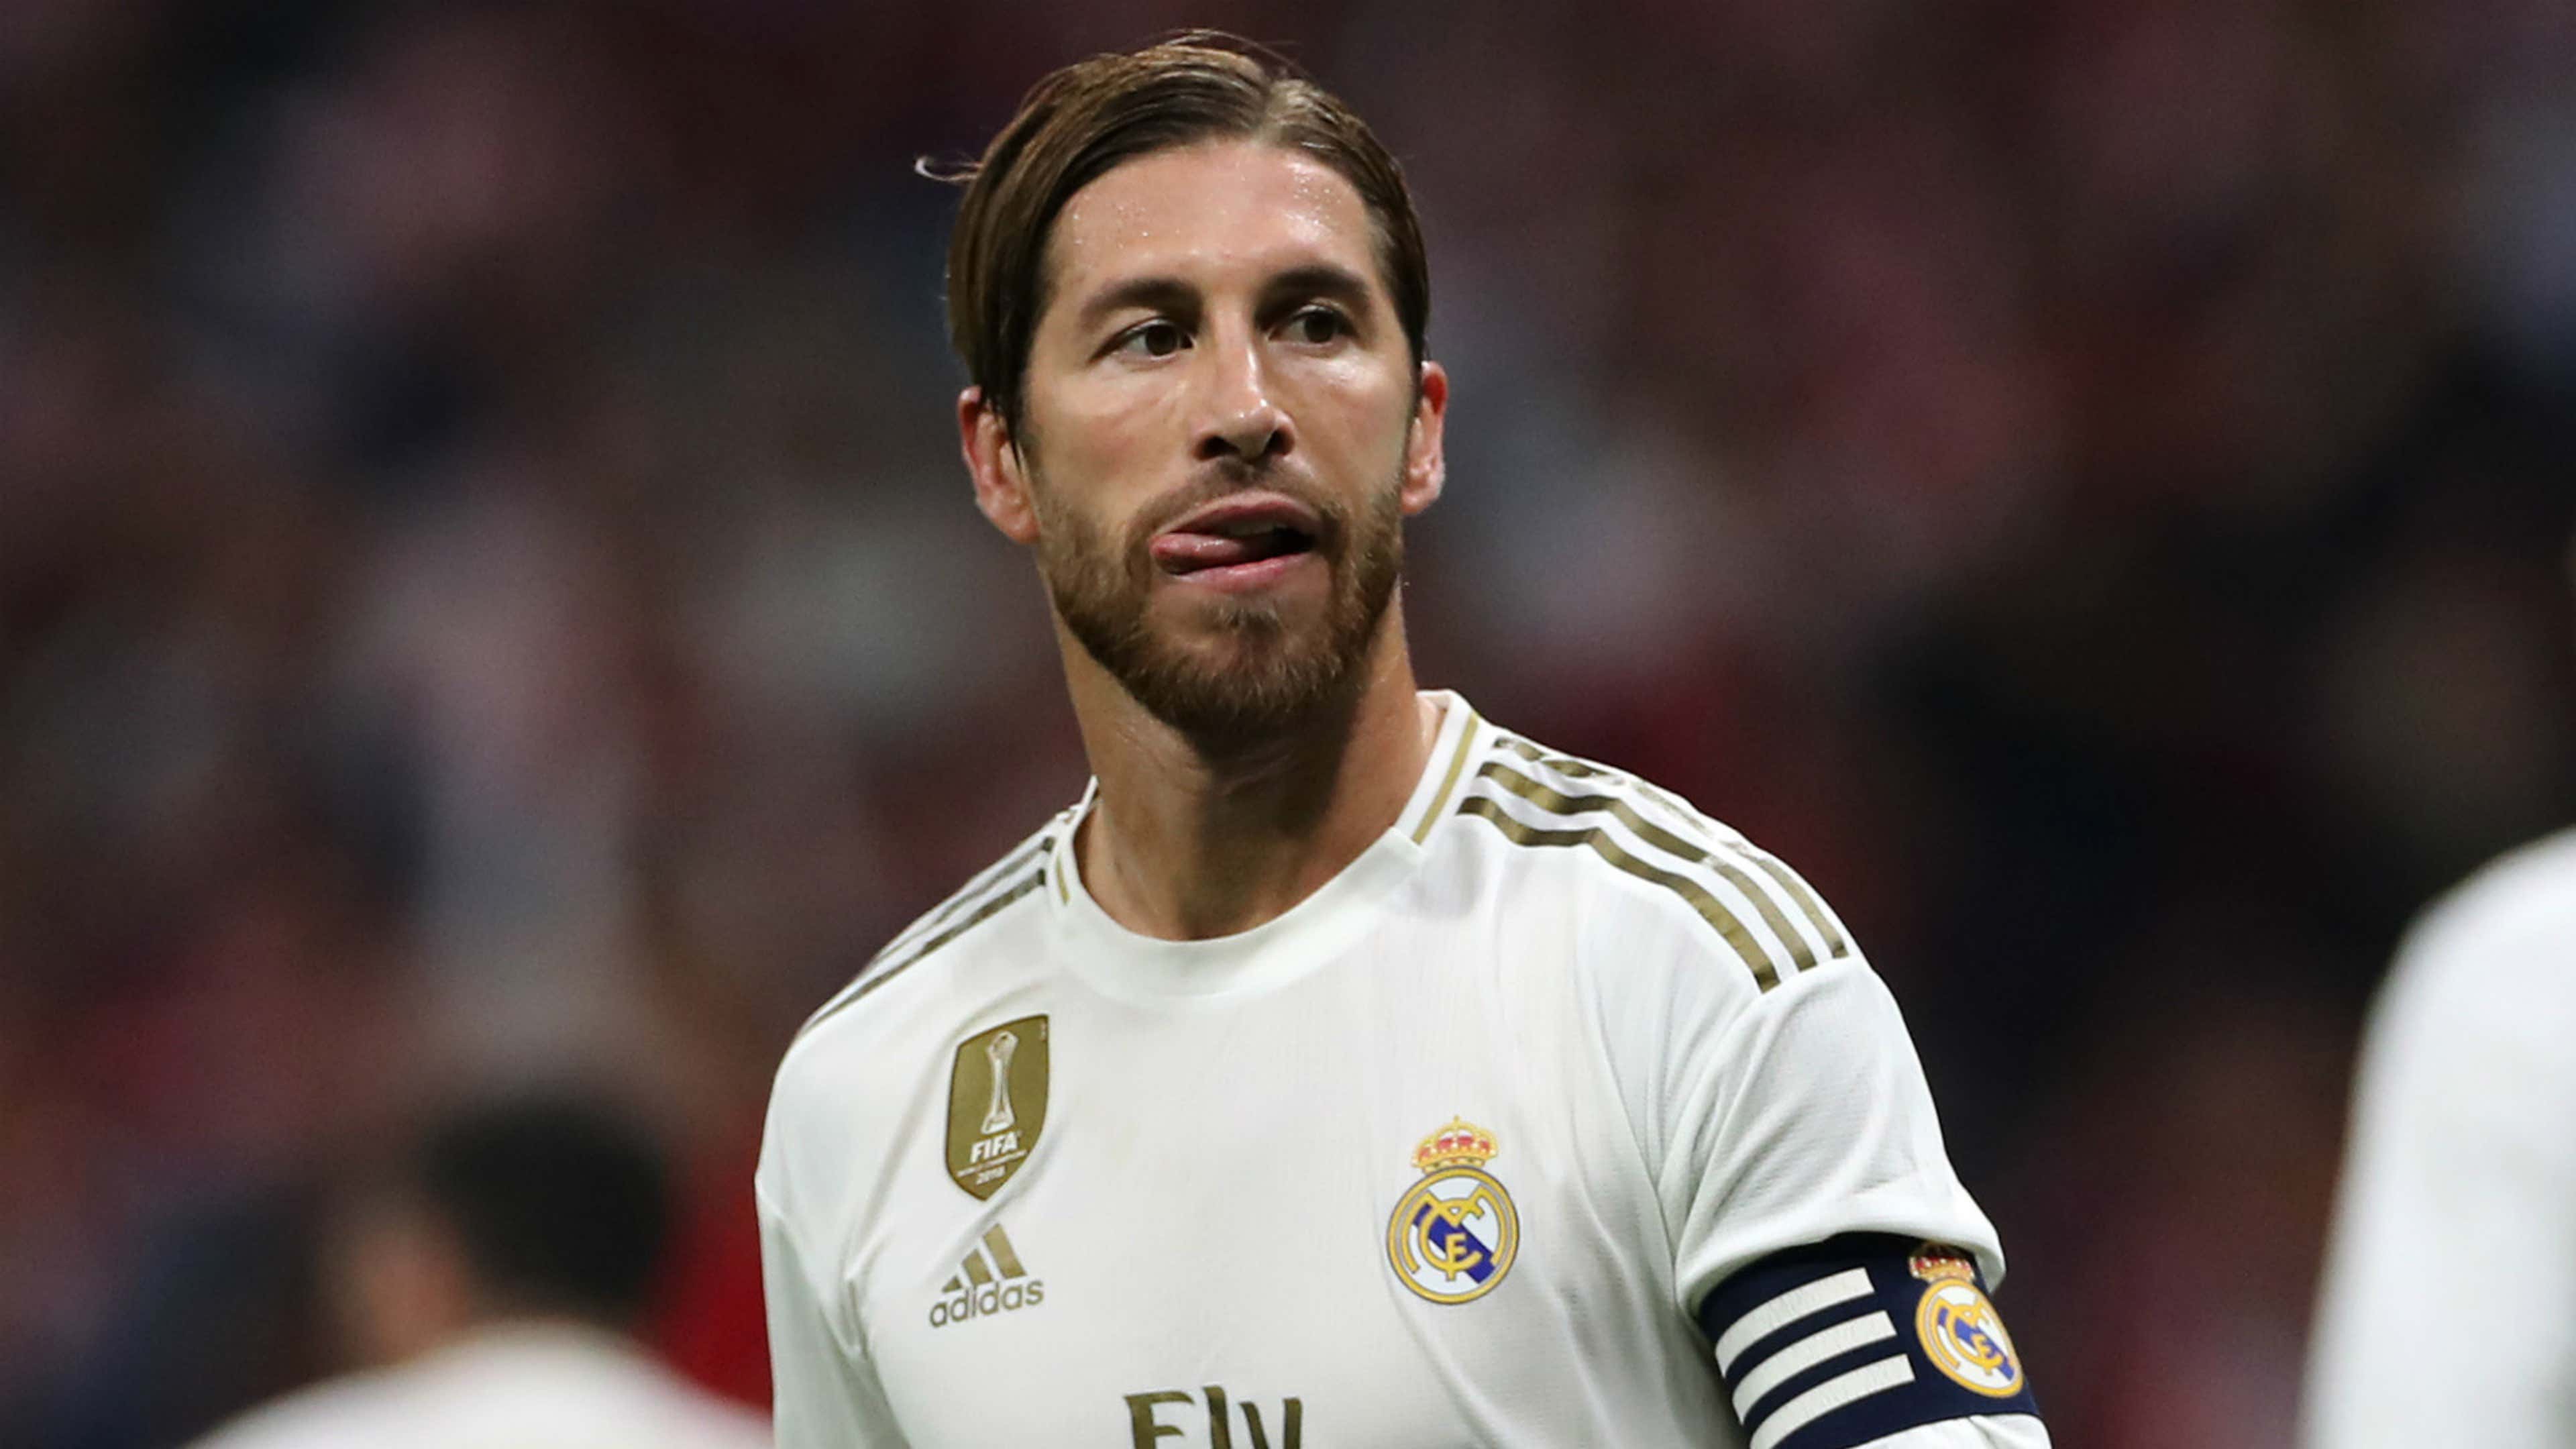 Ramos had 'no other option' but to undergo surgery as Real Madrid wait on  skipper amid exit talk